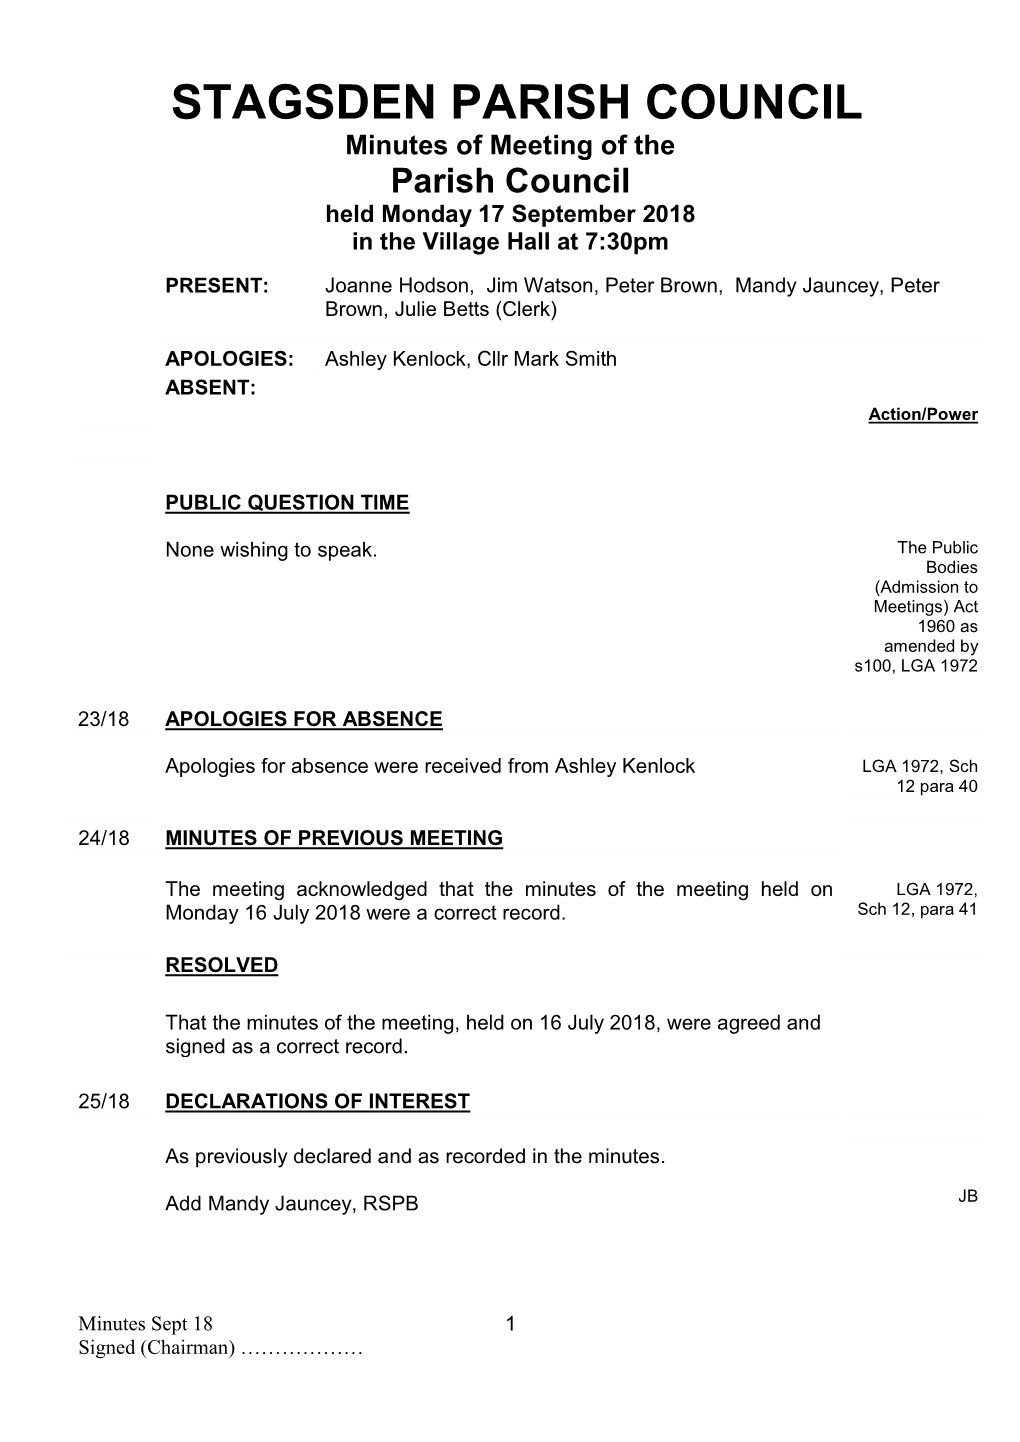 STAGSDEN PARISH COUNCIL Minutes of Meeting of the Parish Council Held Monday 17 September 2018 in the Village Hall at 7:30Pm